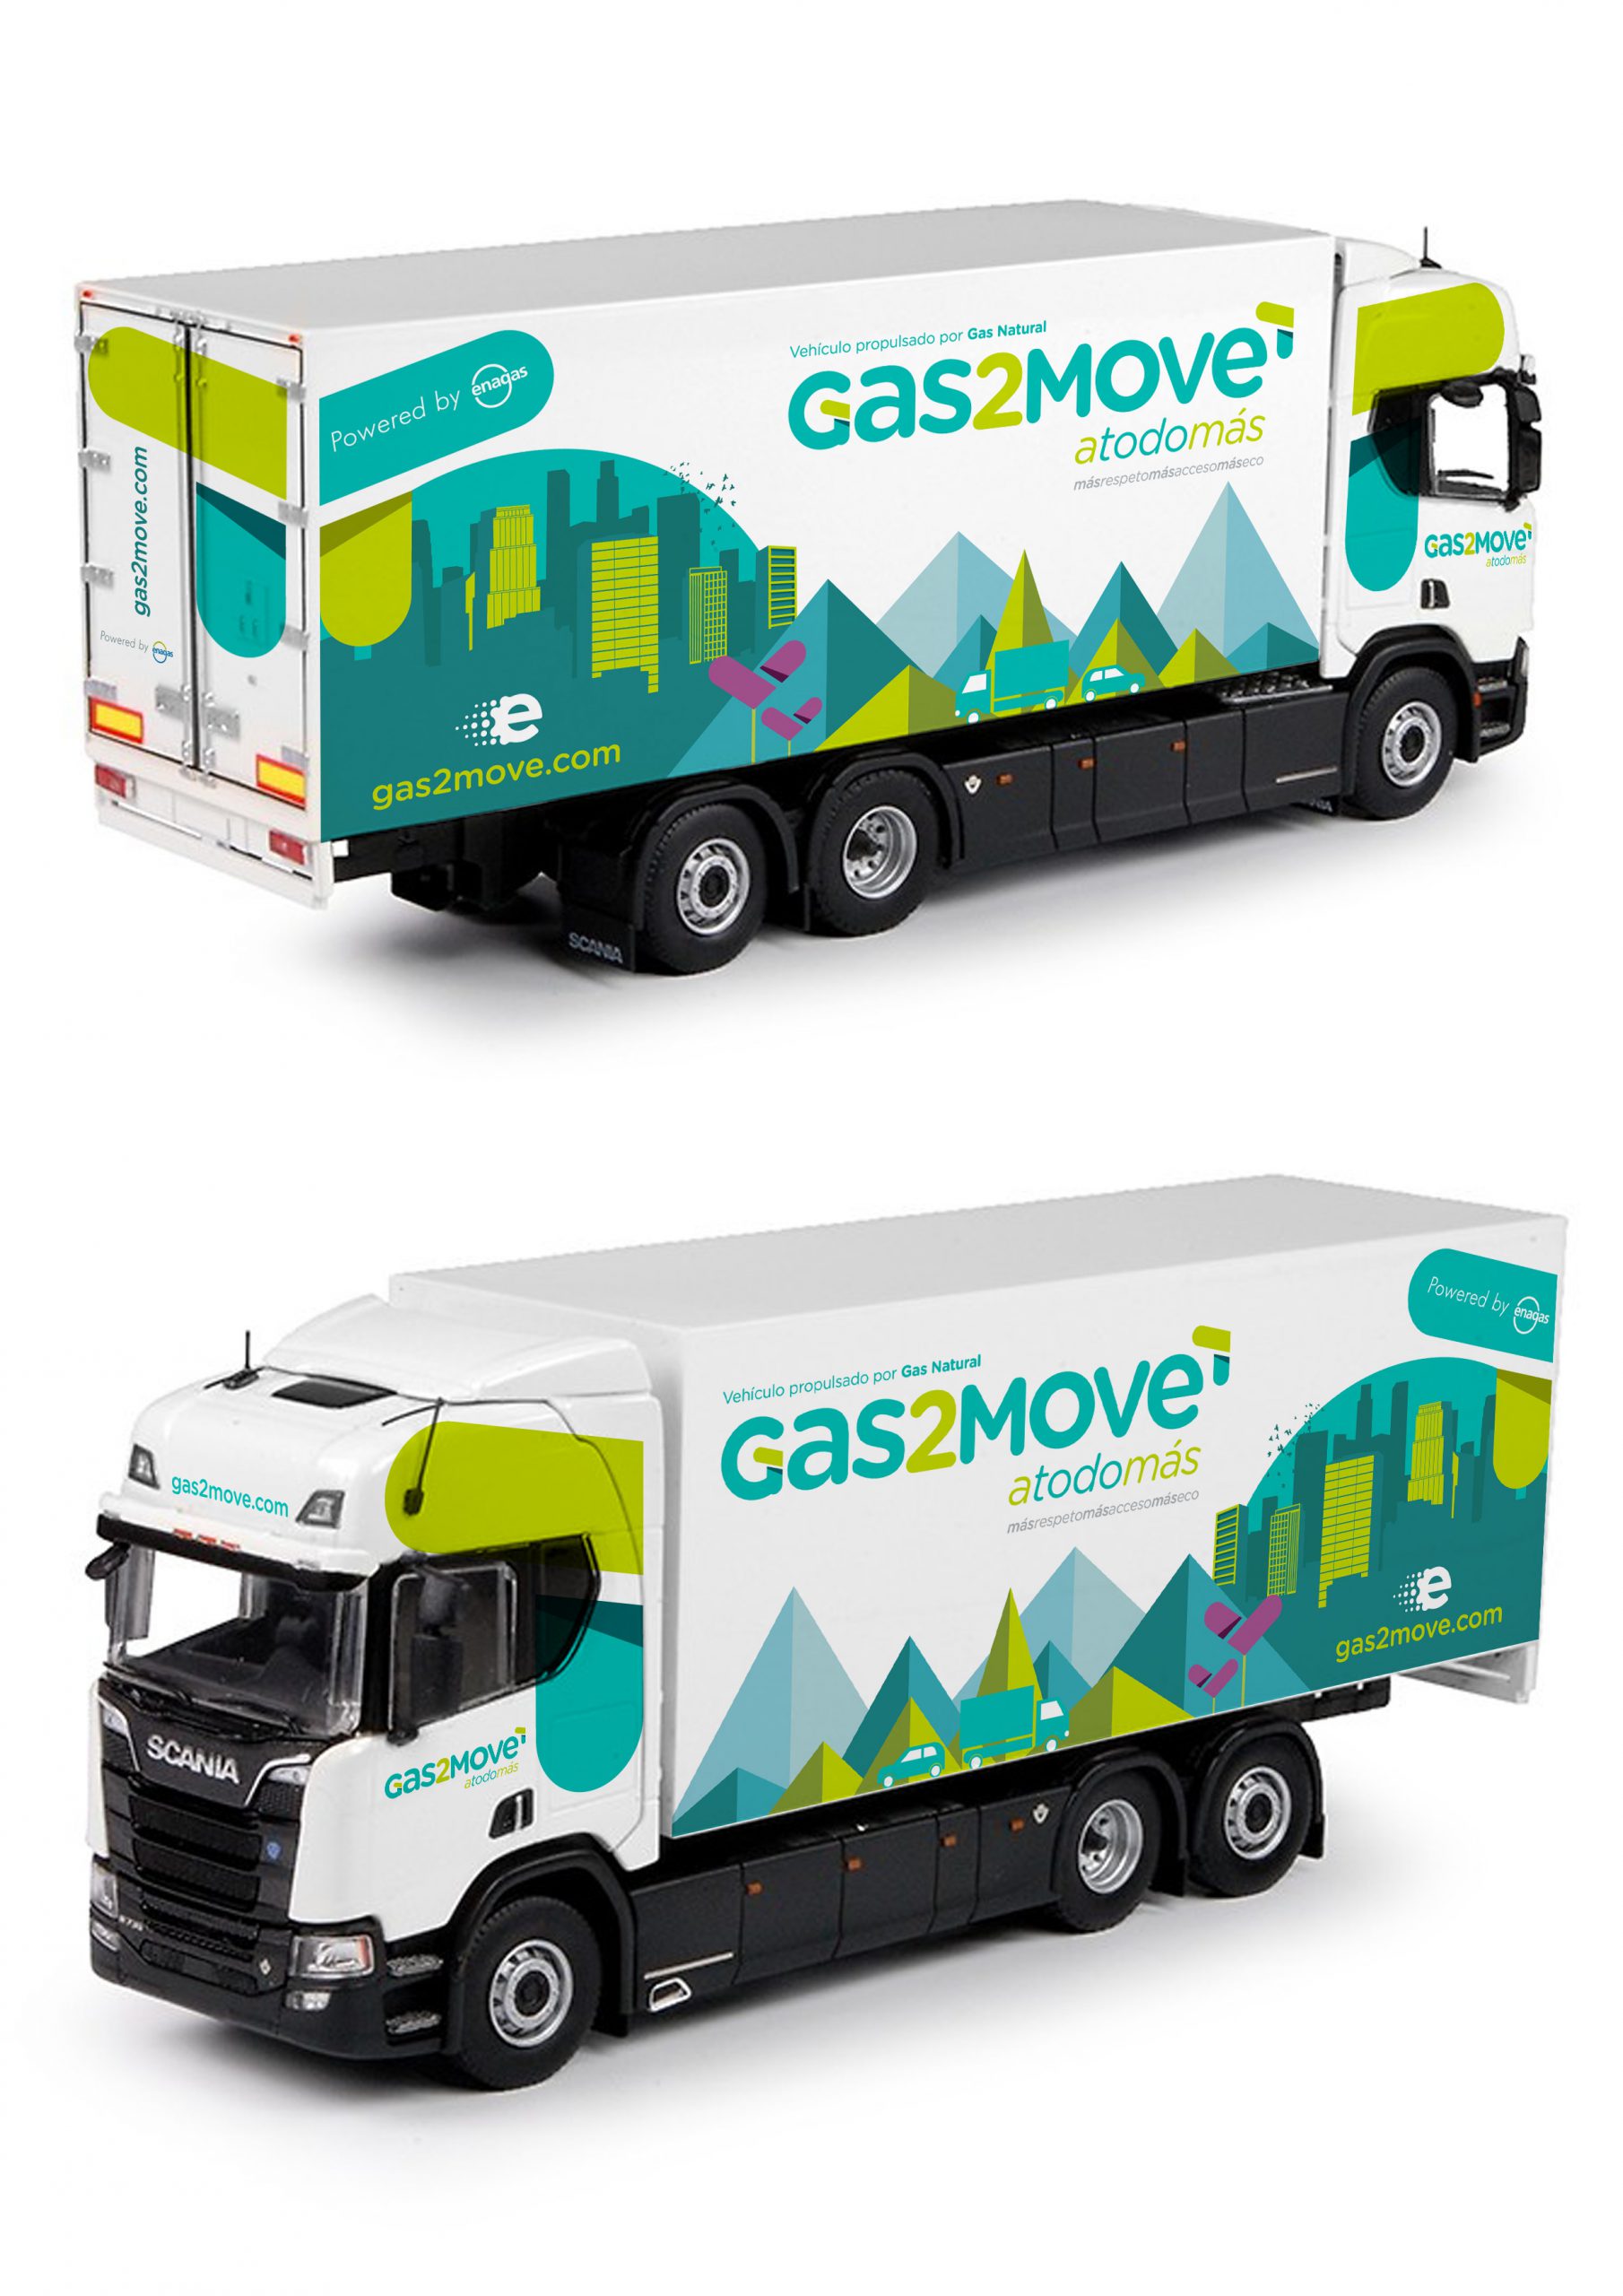 camion_gas2move.jpg